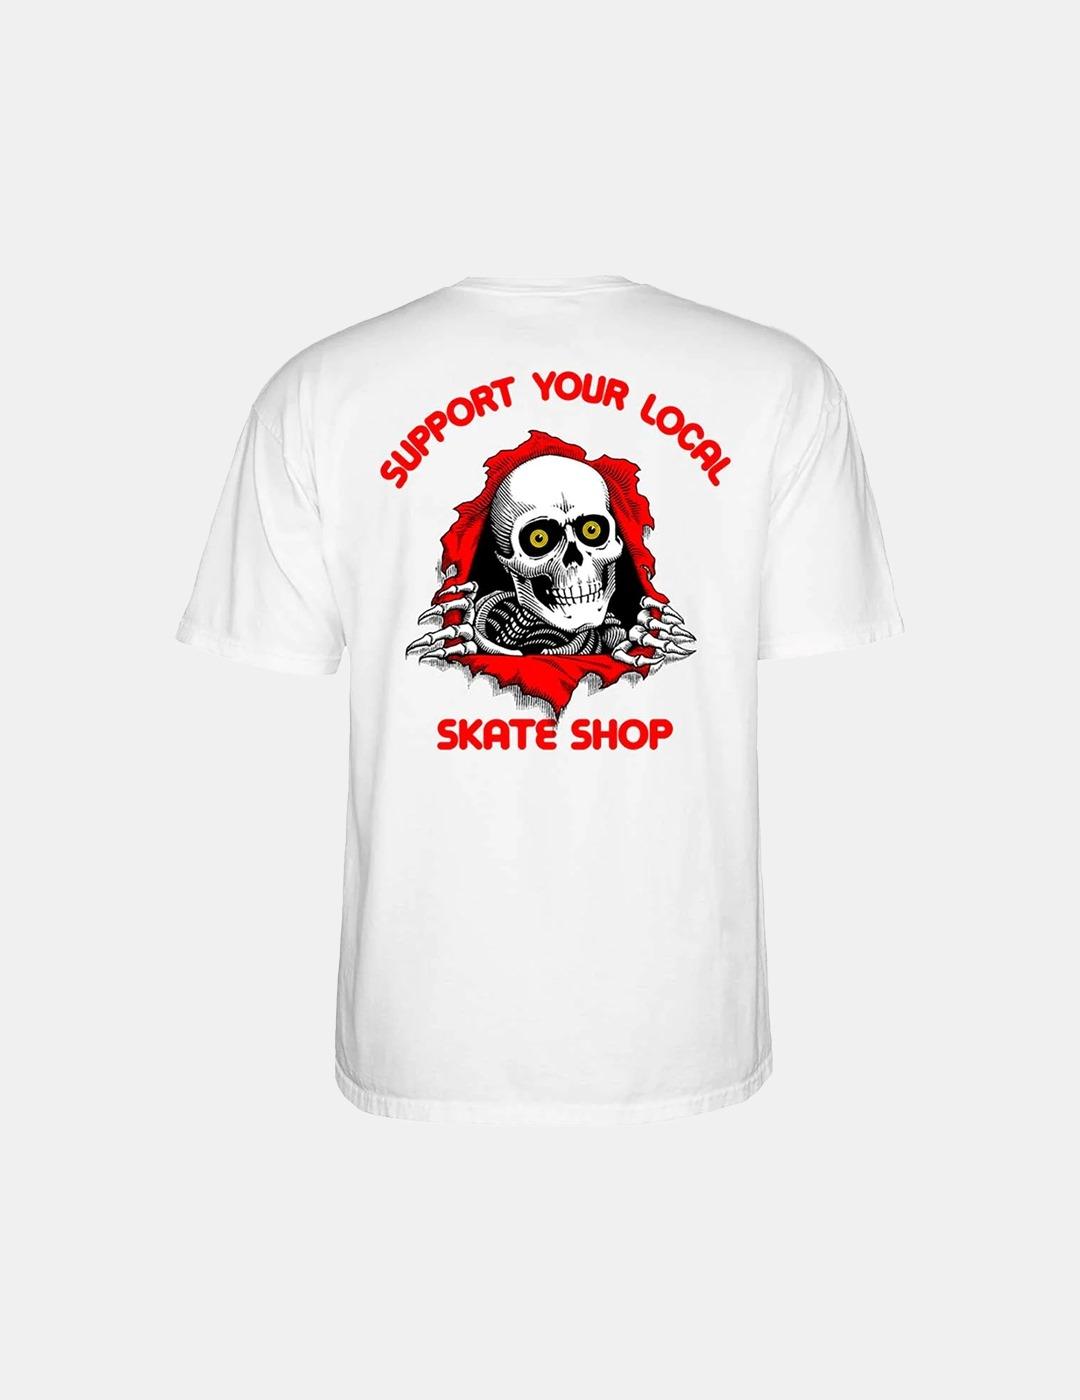 Camiseta Powell Peralta Ripper Support Your Local